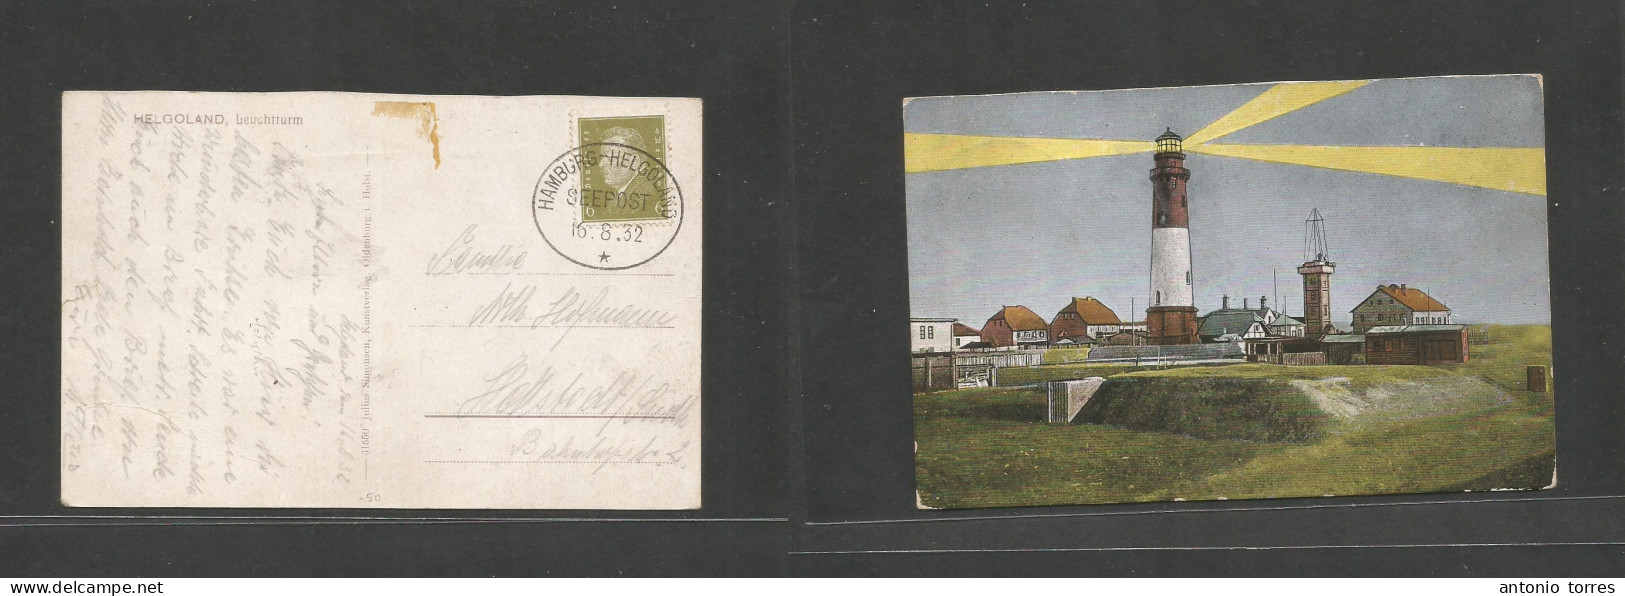 Bc - Heligoland. 1932 (16 Aug) GPO - Germany, Fkd Ppc 6 Pf, Tied Seepost "Hamburg - Heligoland" Ds. Fine Item. - Other & Unclassified